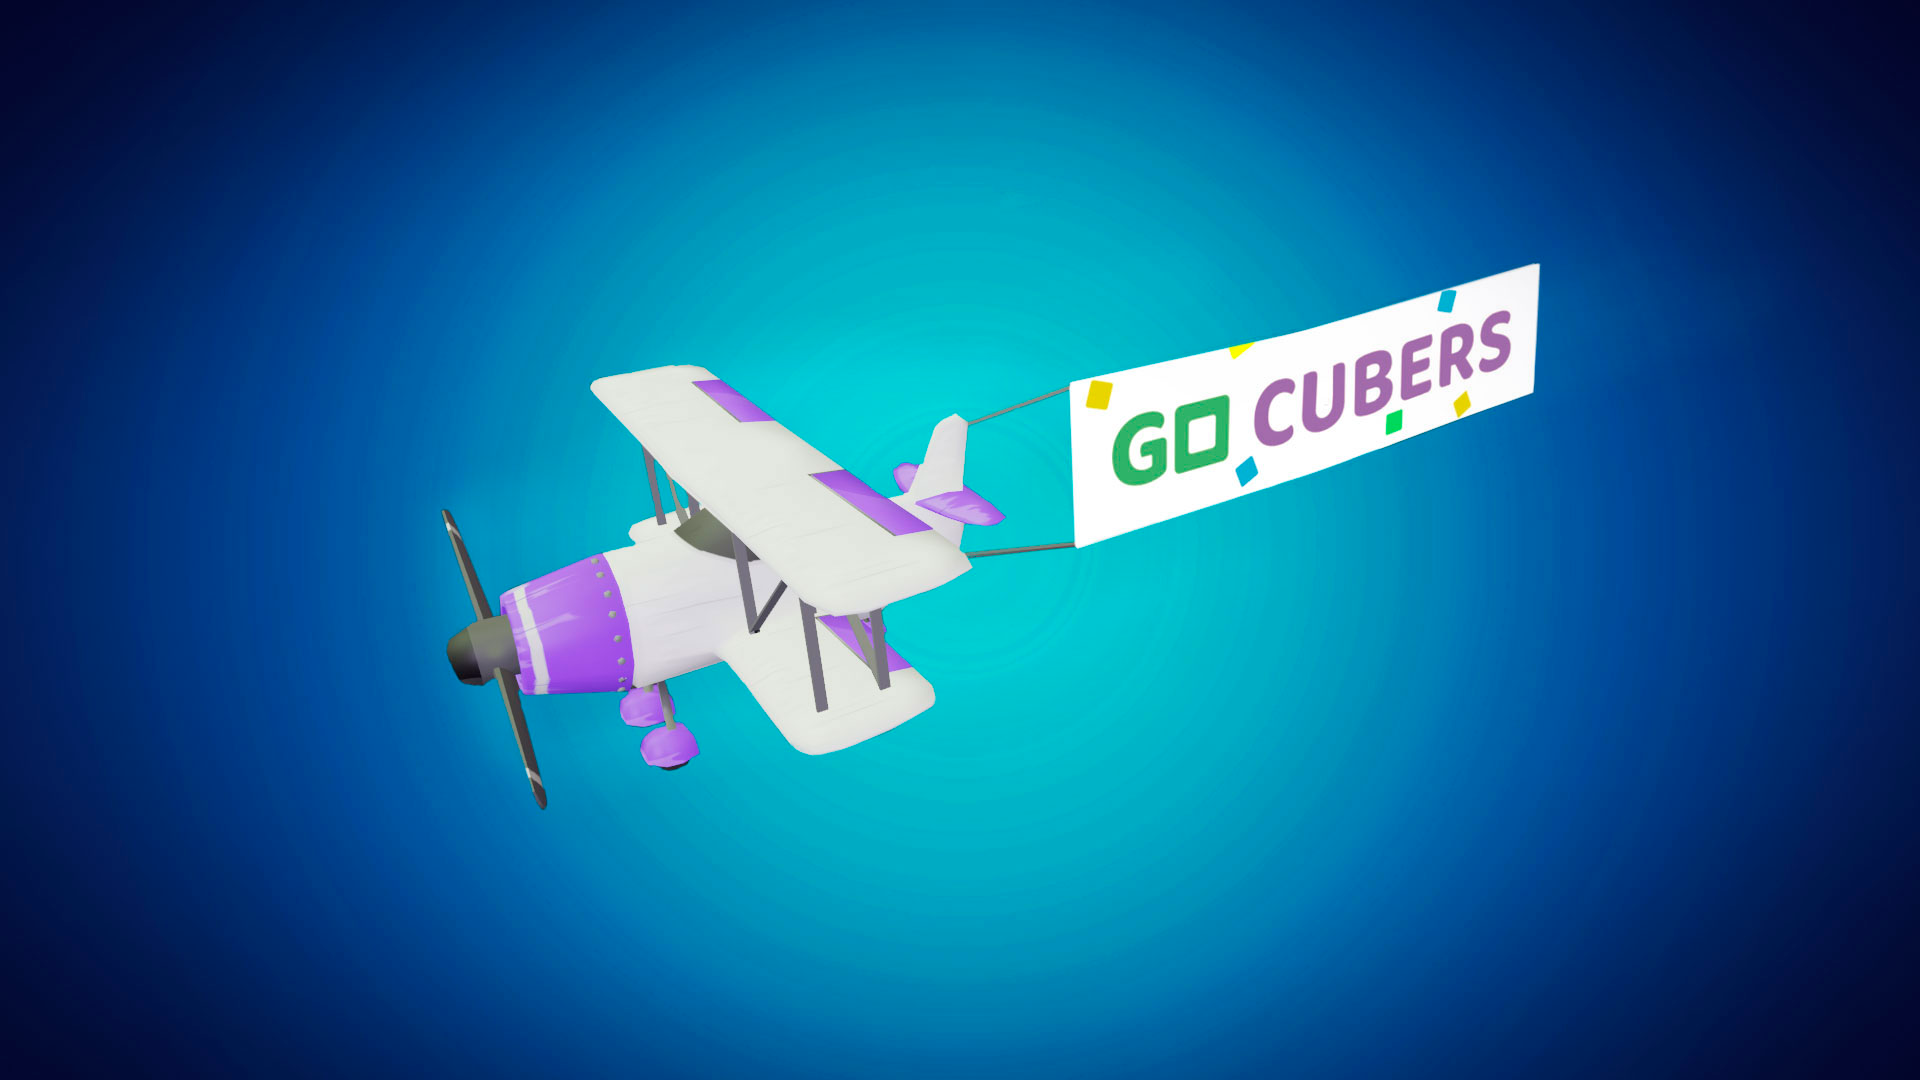 Go cubers!